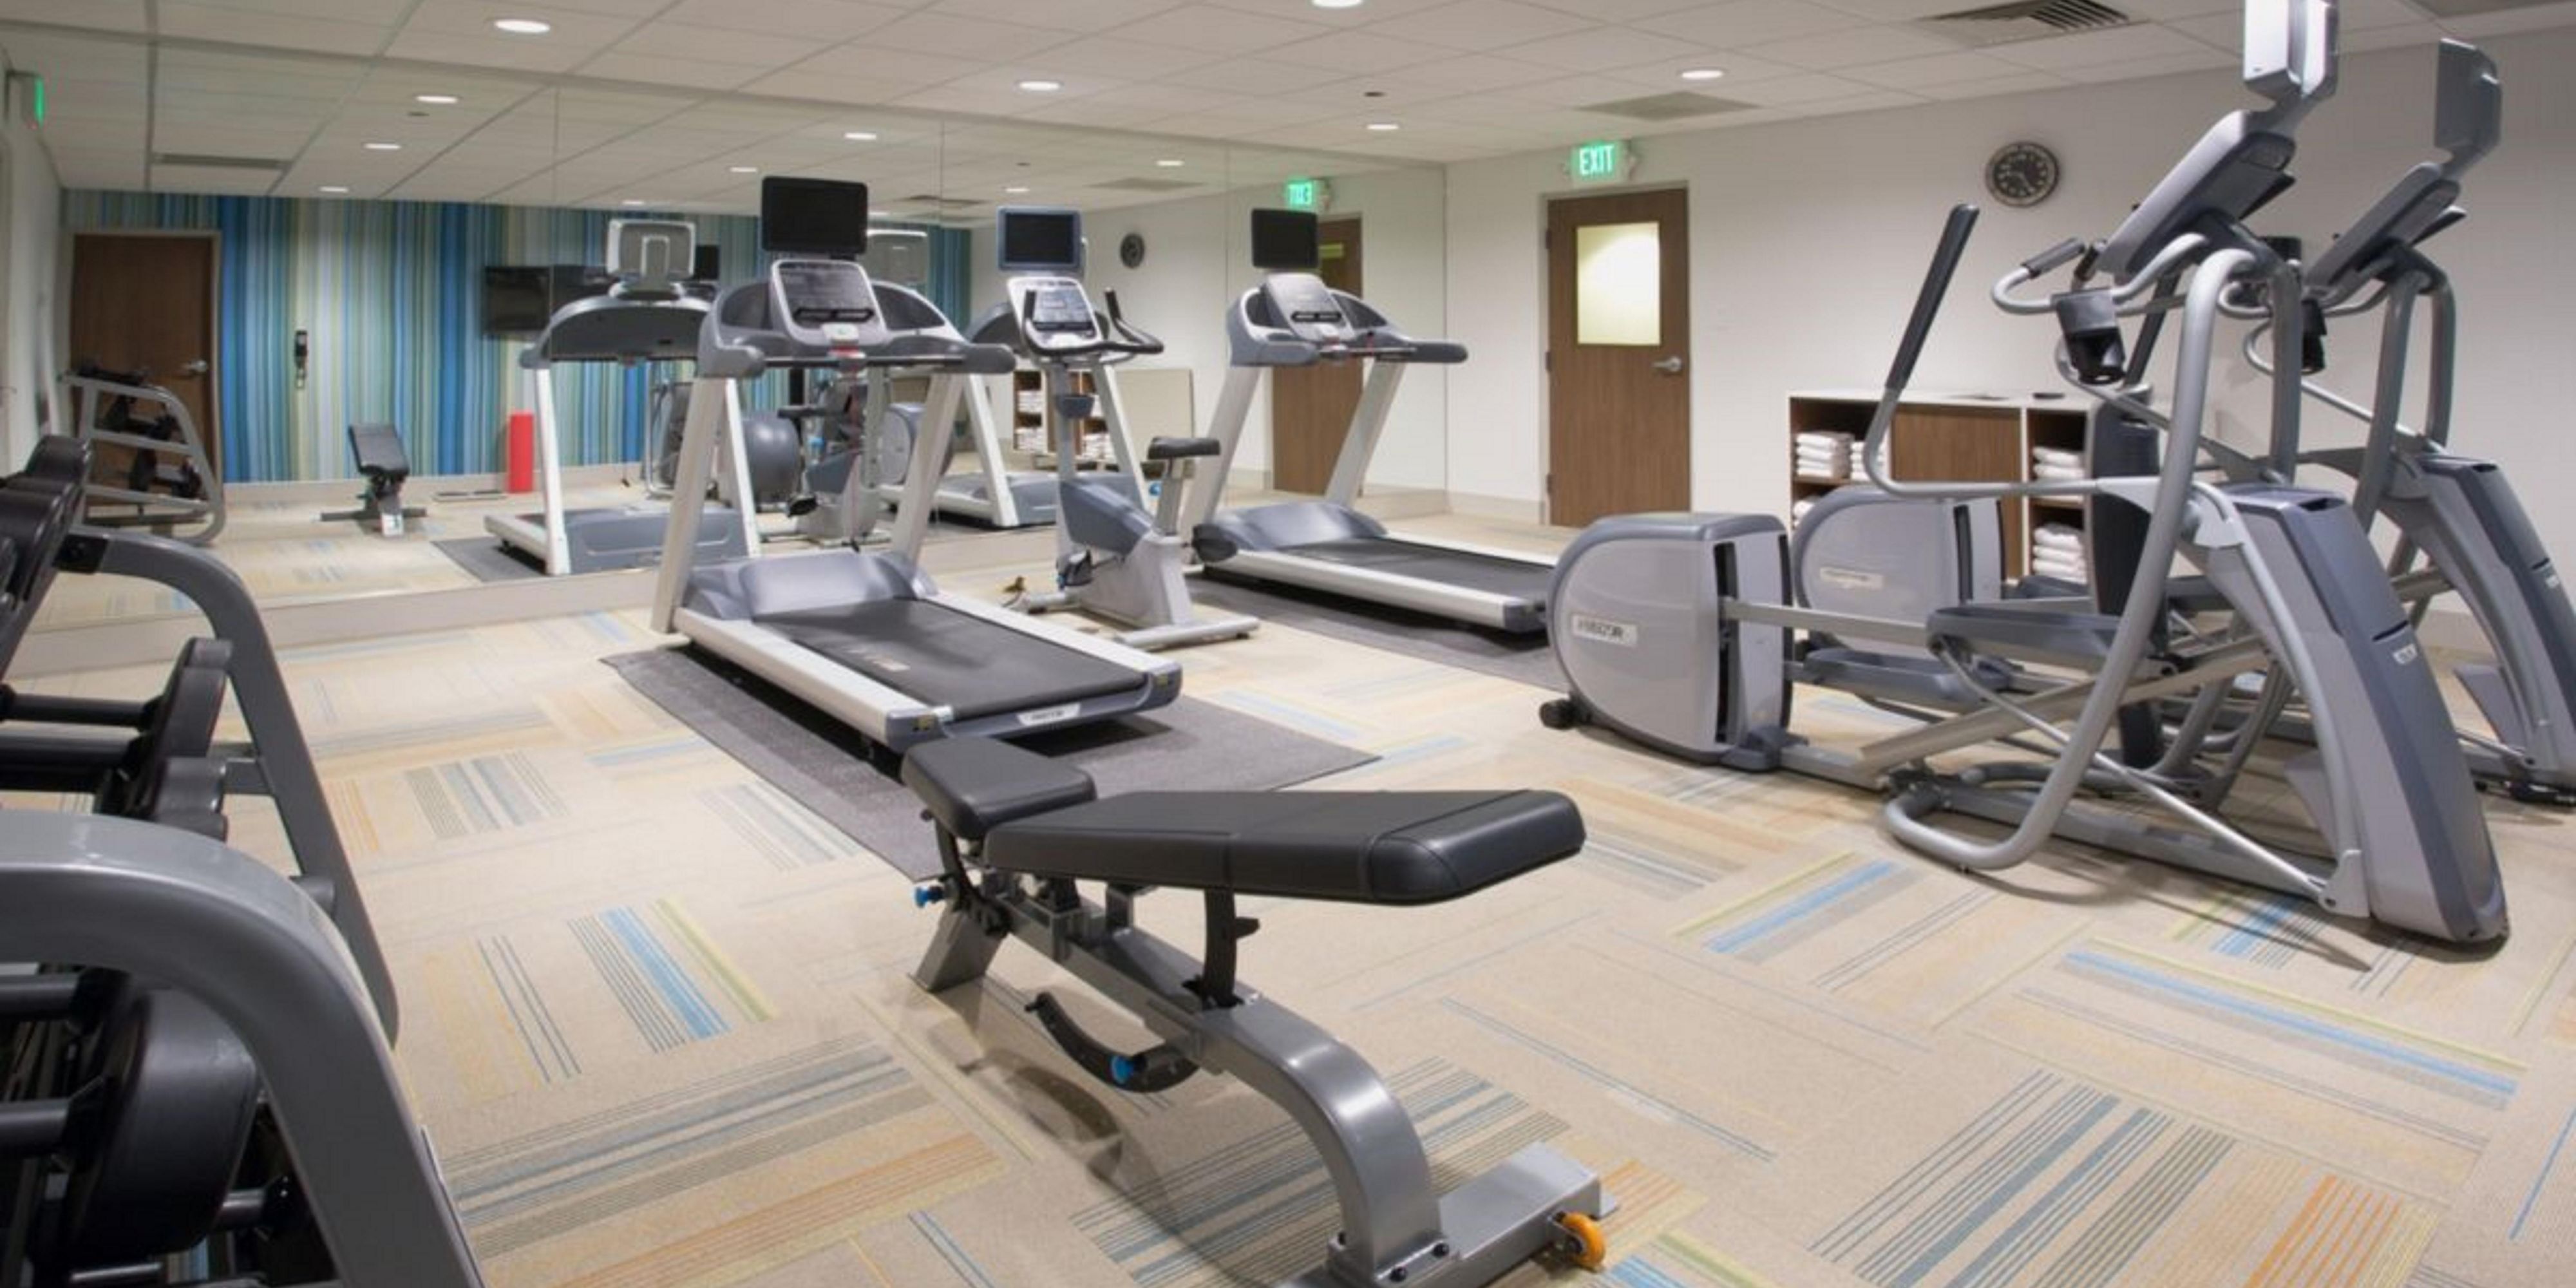 Workout whenever you want! Our fitness center is always open and lots of aerobic and cardio equipment to make it easy to stick to your exercise routine, no sweat! 